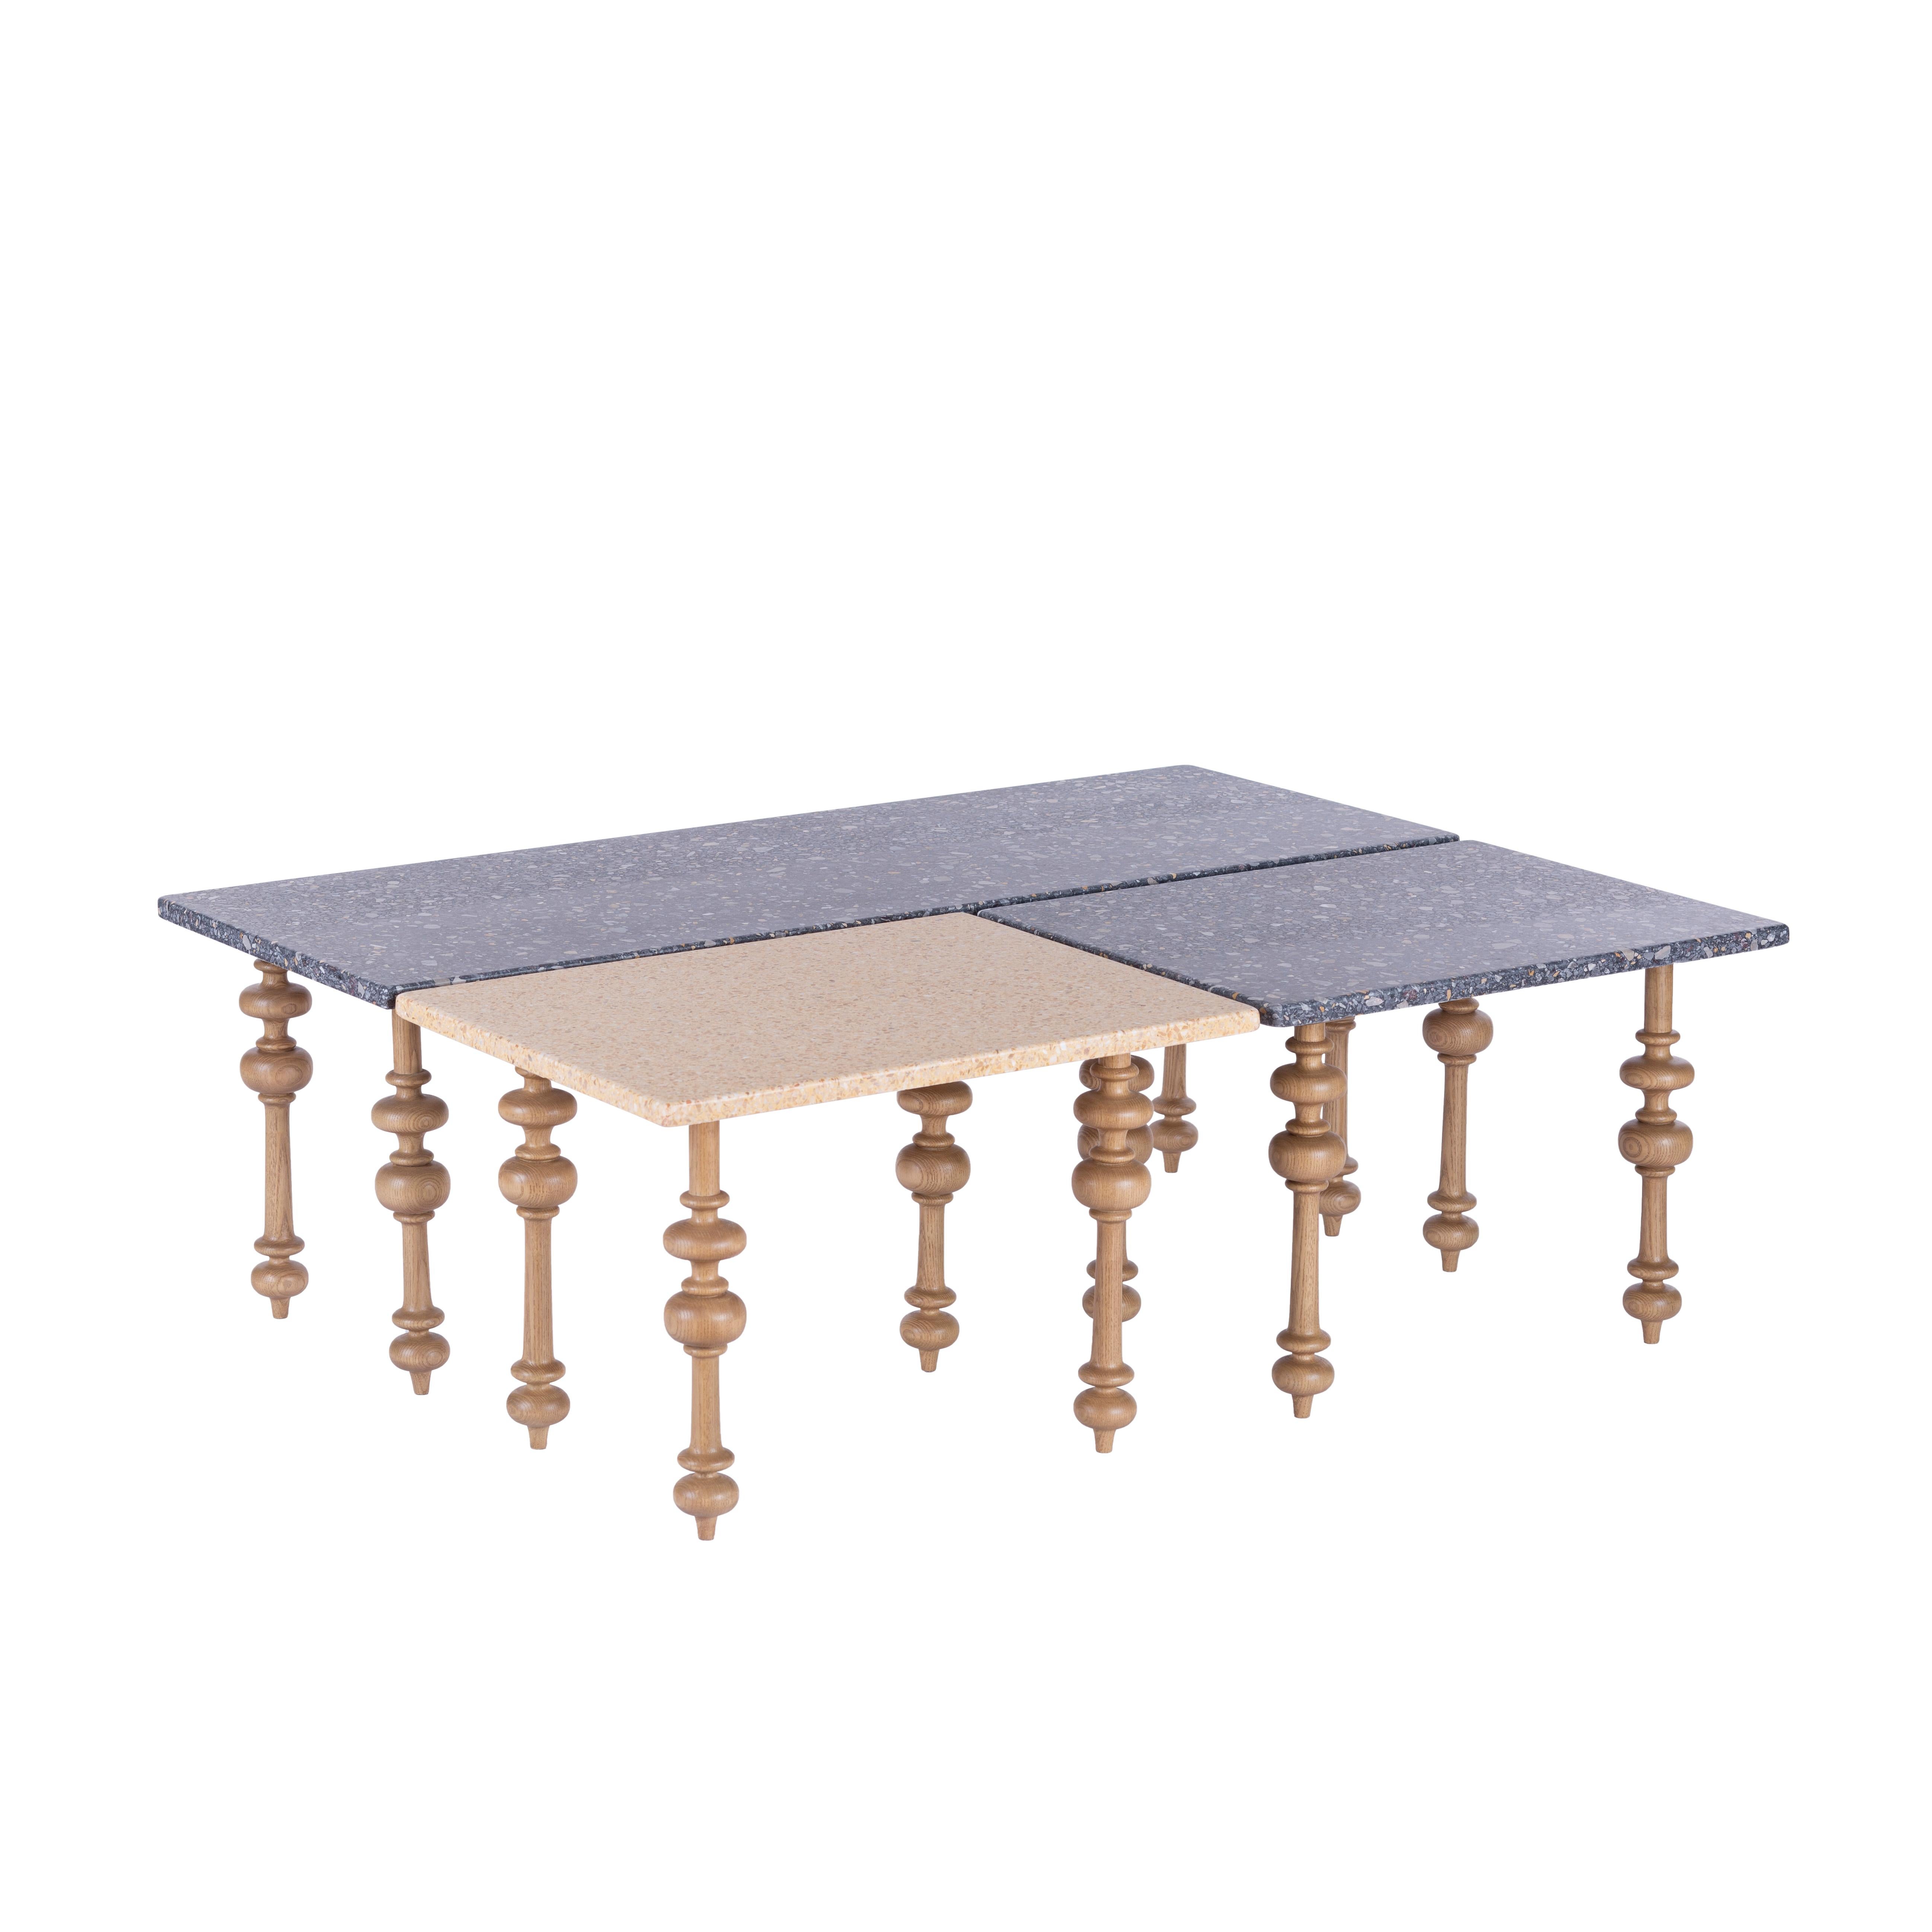 Carved Pitch Pine Outdoor Coffee Table with Italian Terrazzo Tops. 
Our Terrazzo Fusion coffee table set reflects our love for mixing materials; made of Mashrabeya-inspired carved Pitch Pine legs and Italian Terrazzo tops. This fabulous coffee table